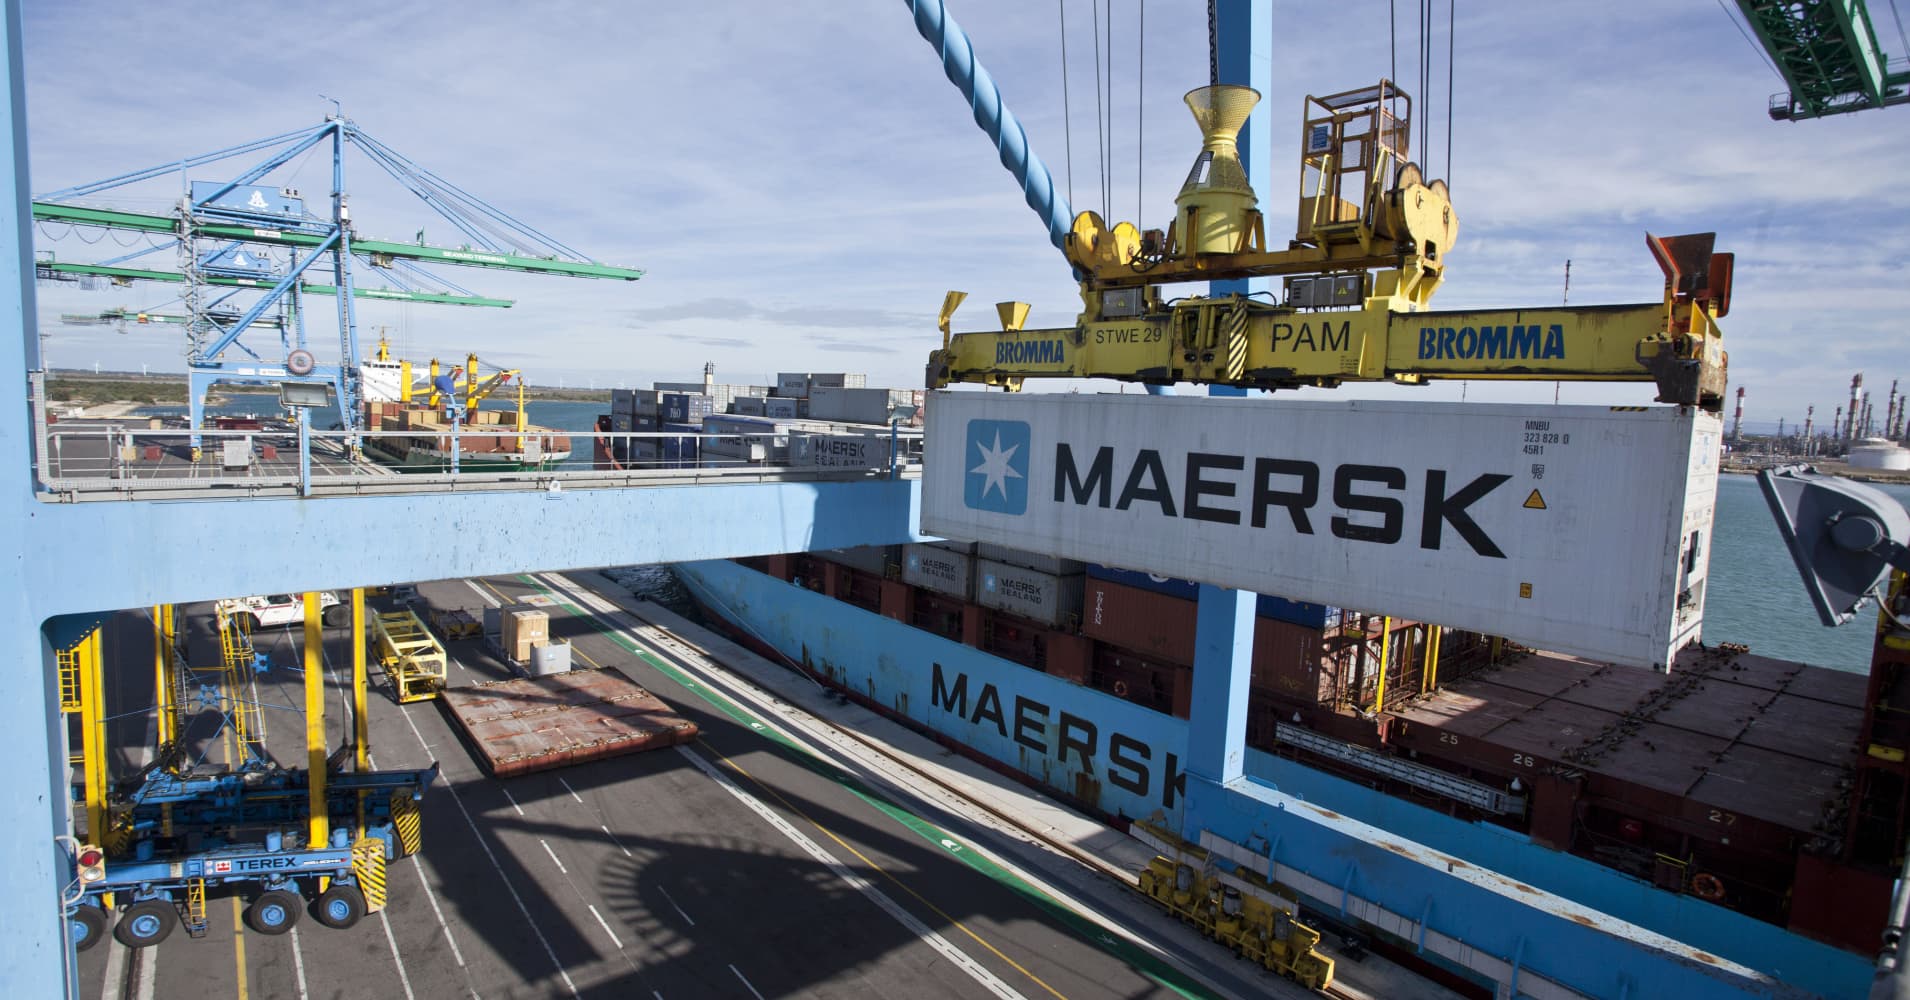 Blockchain technology is moving into the shipping industry – with Microsoft and Maersk on board